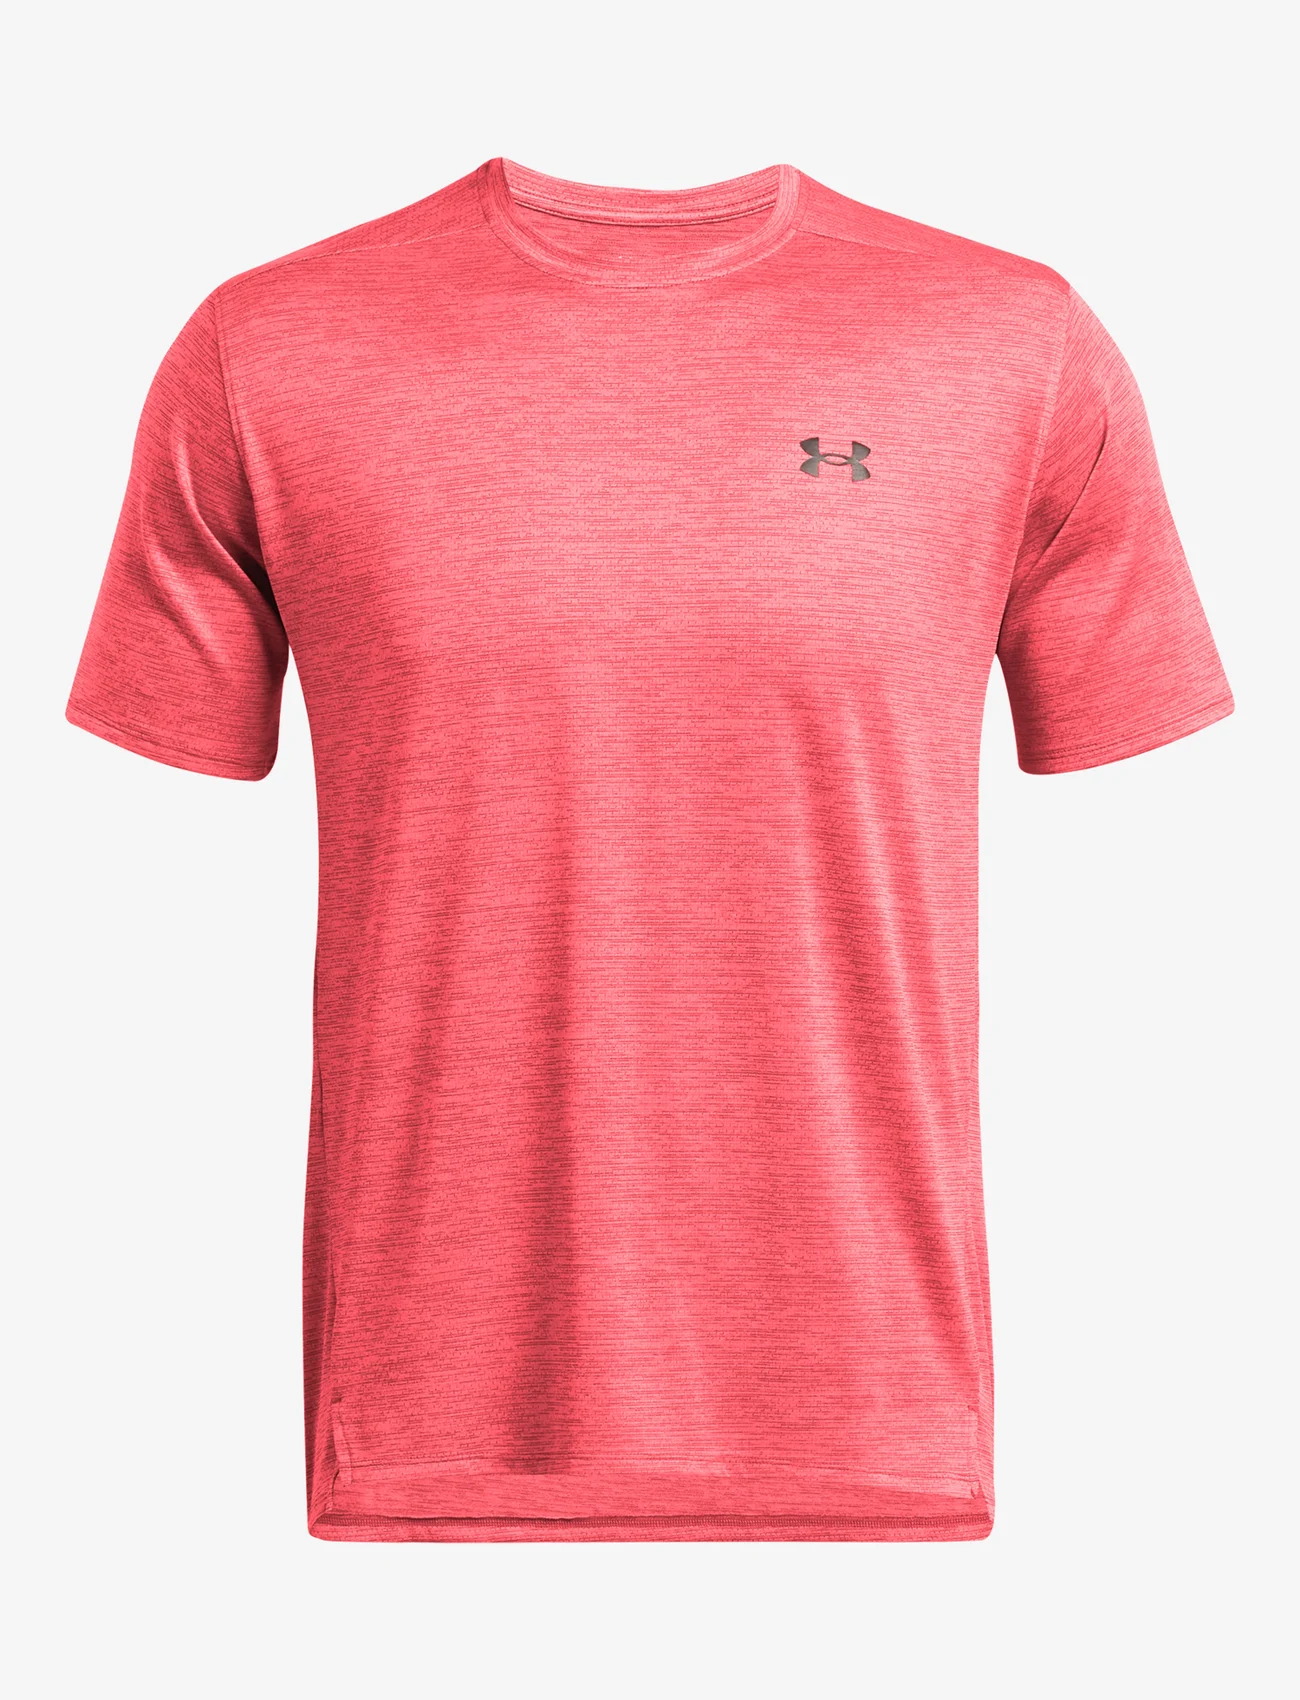 Under Armour - UA Tech Vent SS - short-sleeved t-shirts - red - 0